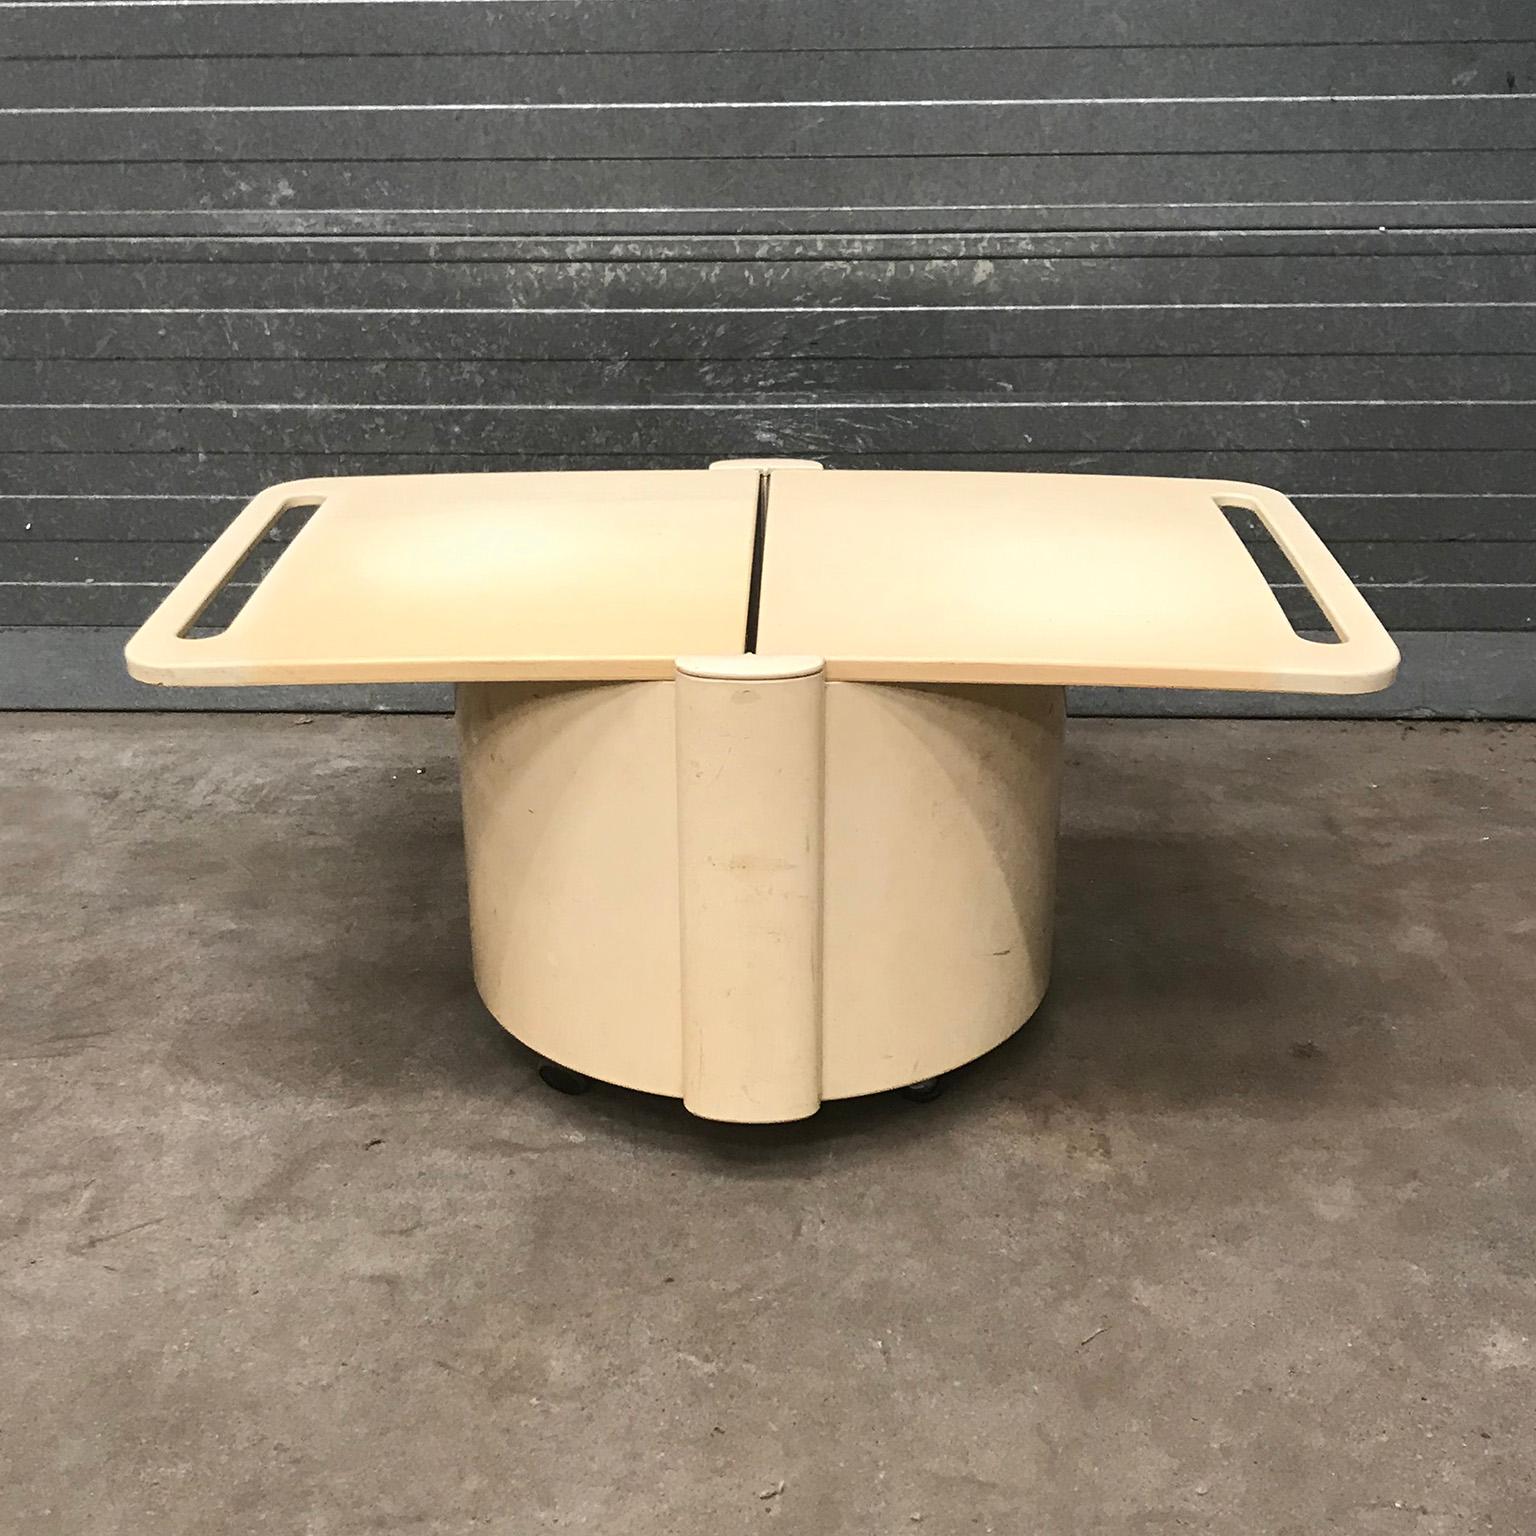 Mobile 1970s Plastic Vintage Space Age Bar in Off-White, circa 1970 For Sale 4